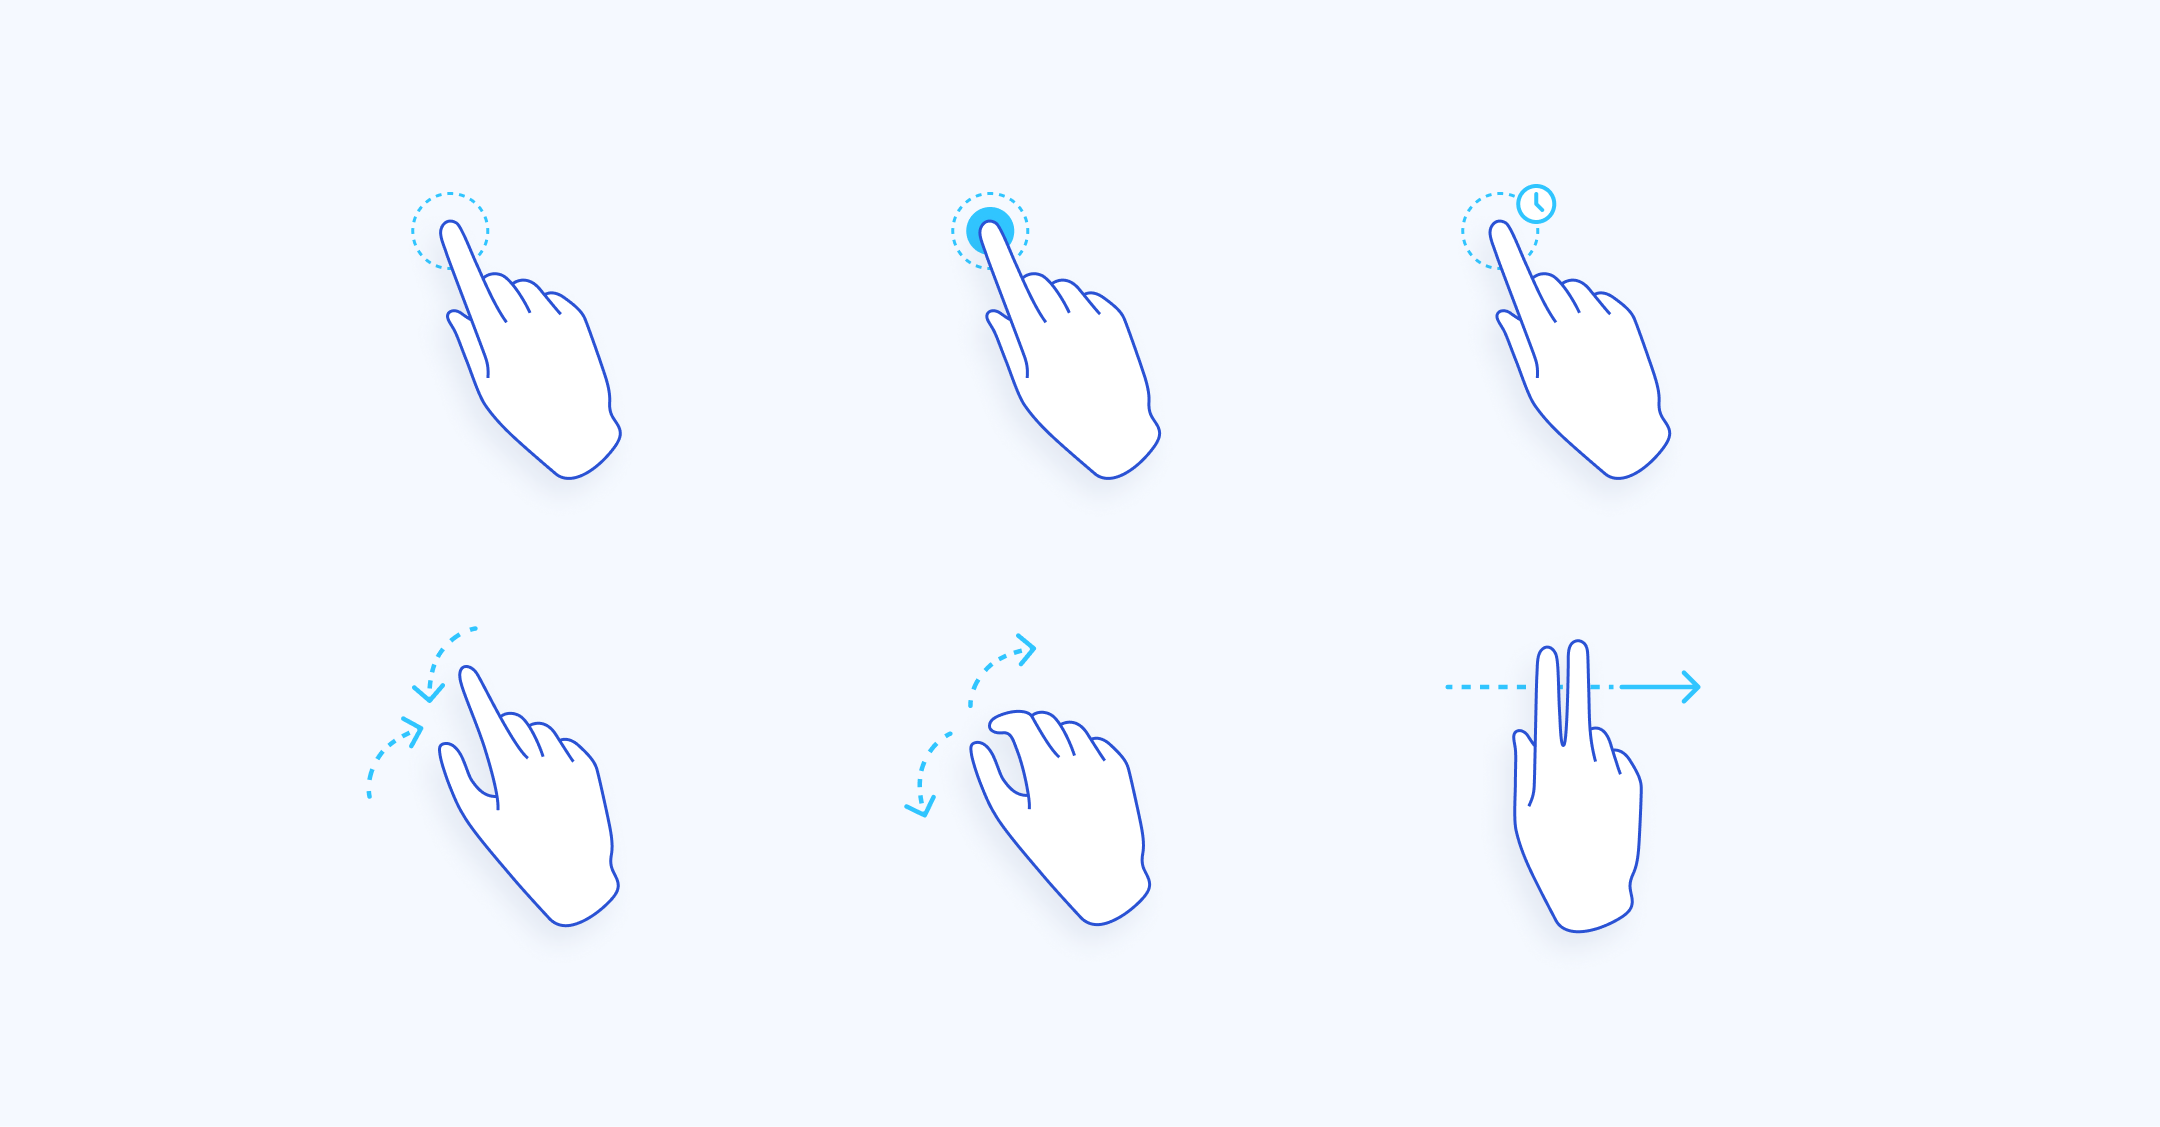 Gestures used to interact with an app